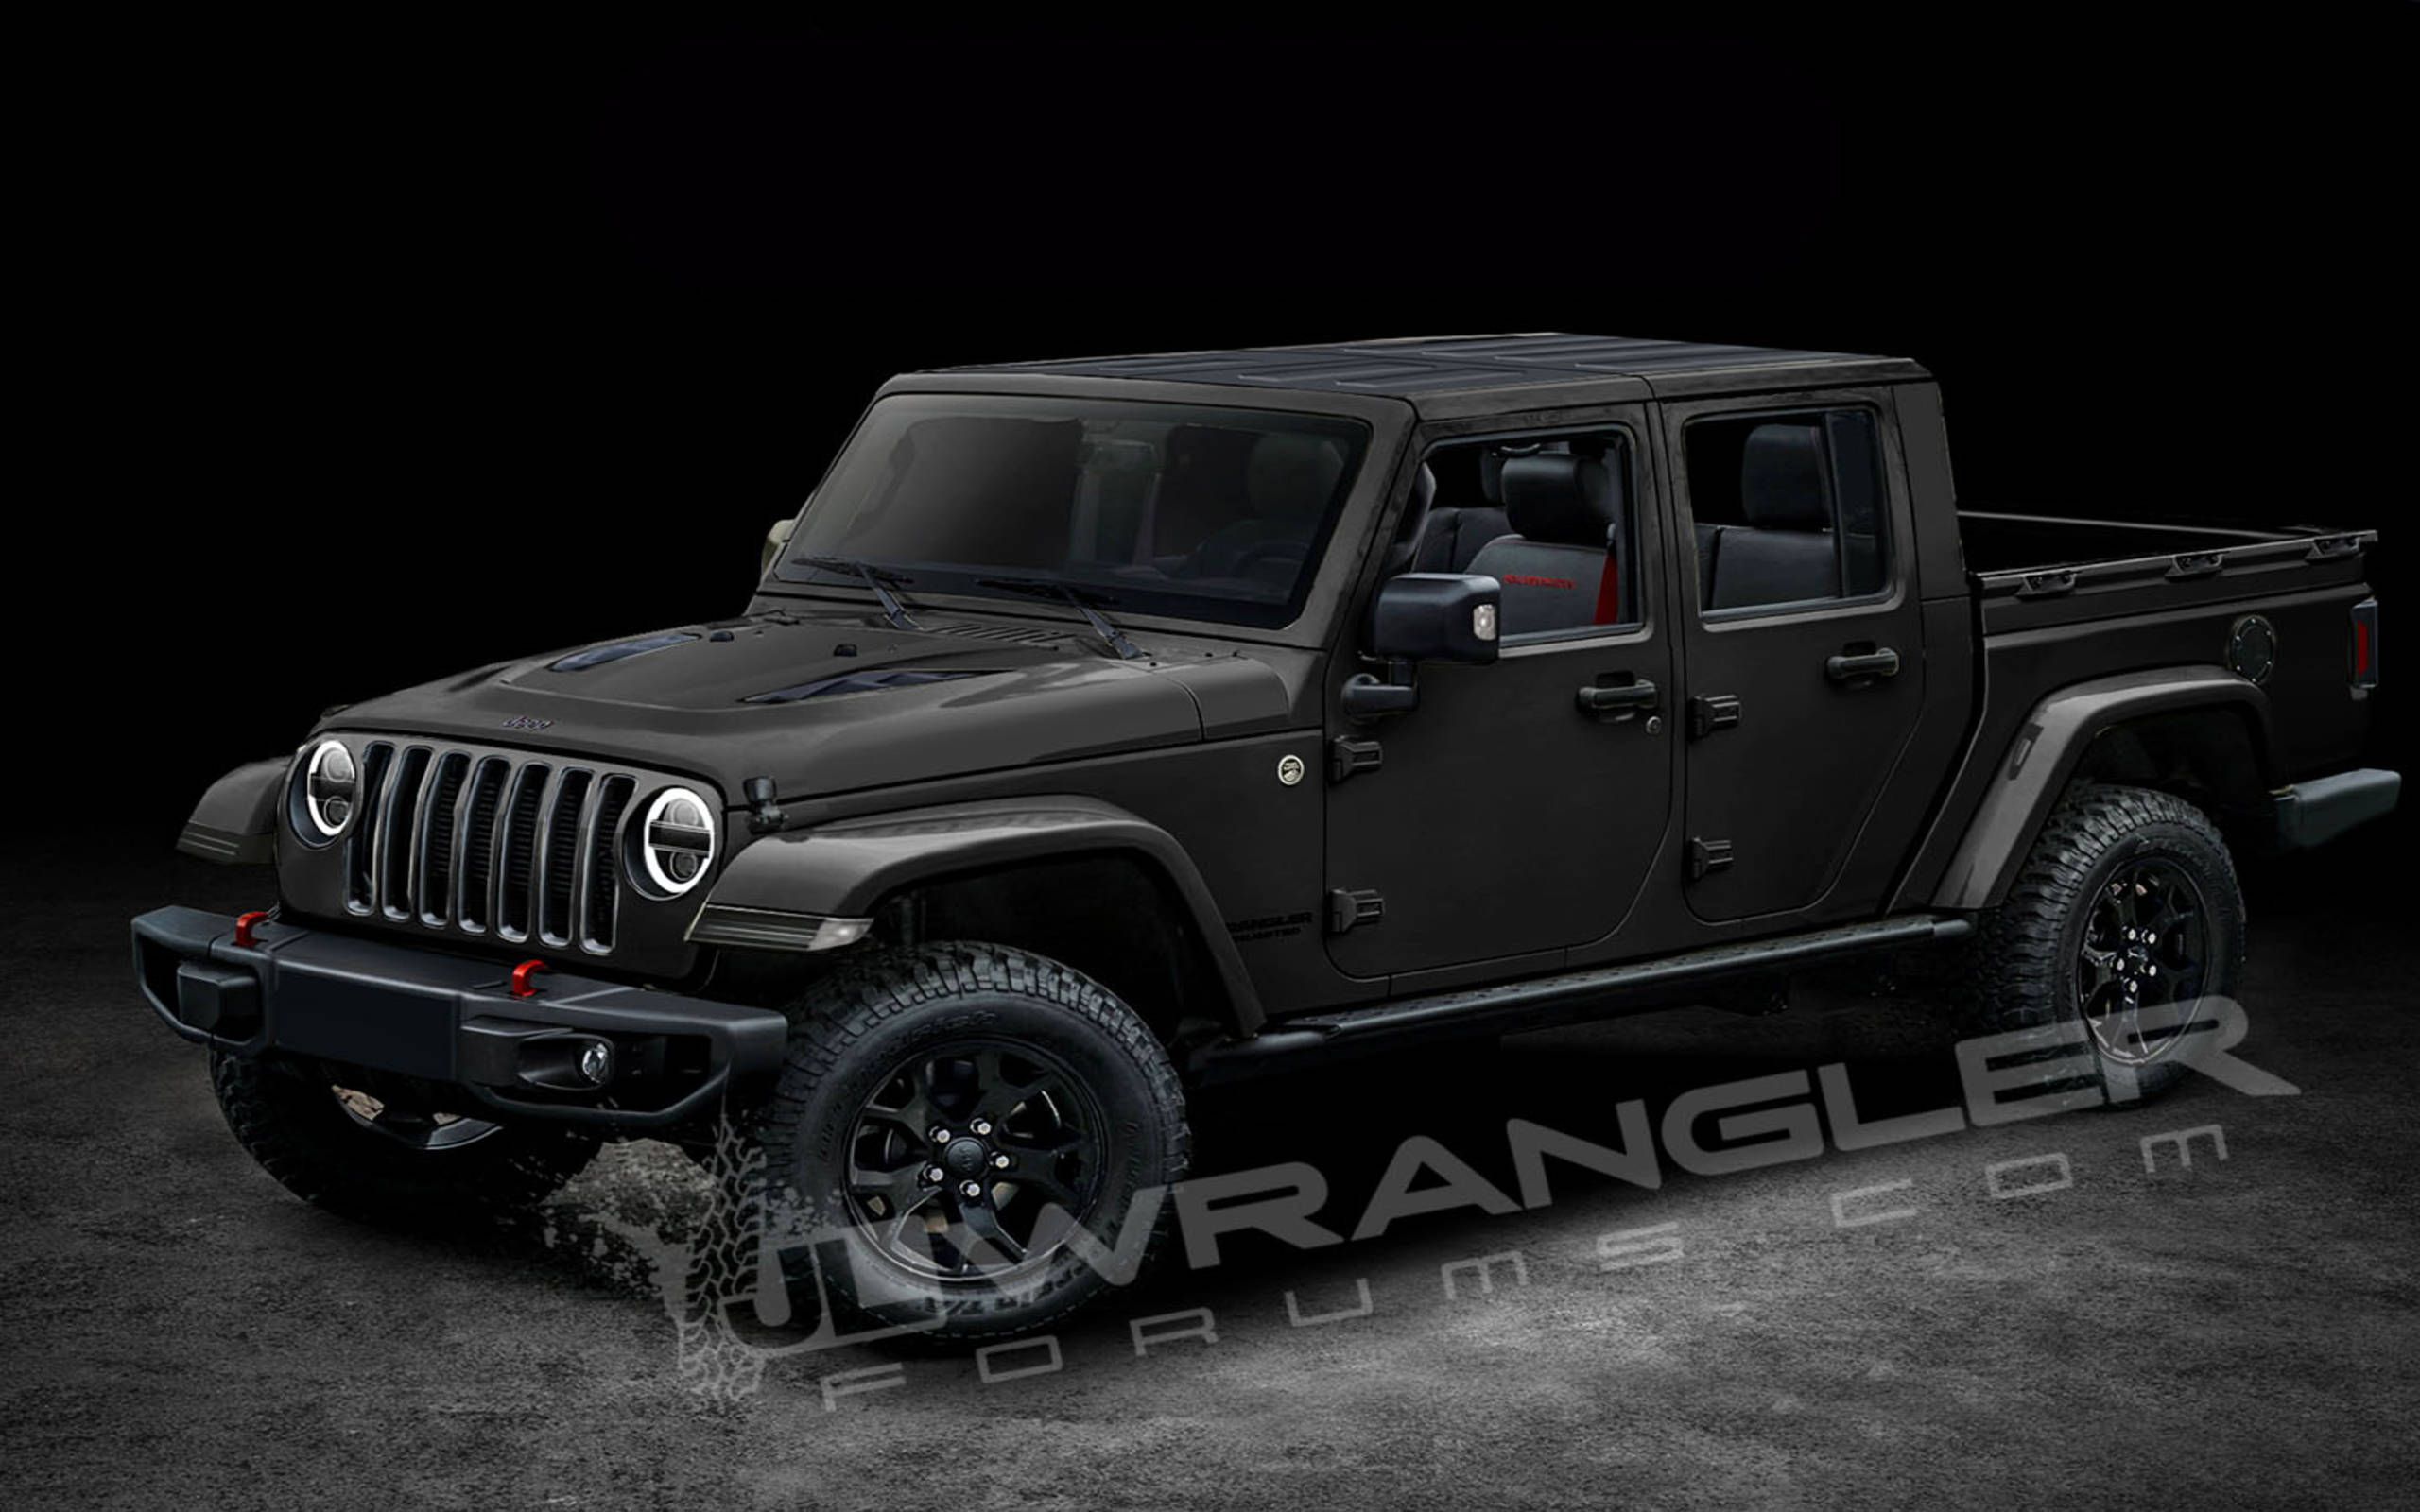 Report: Upcoming Jeep Wrangler pickup will be called the Scrambler, get  diesel power